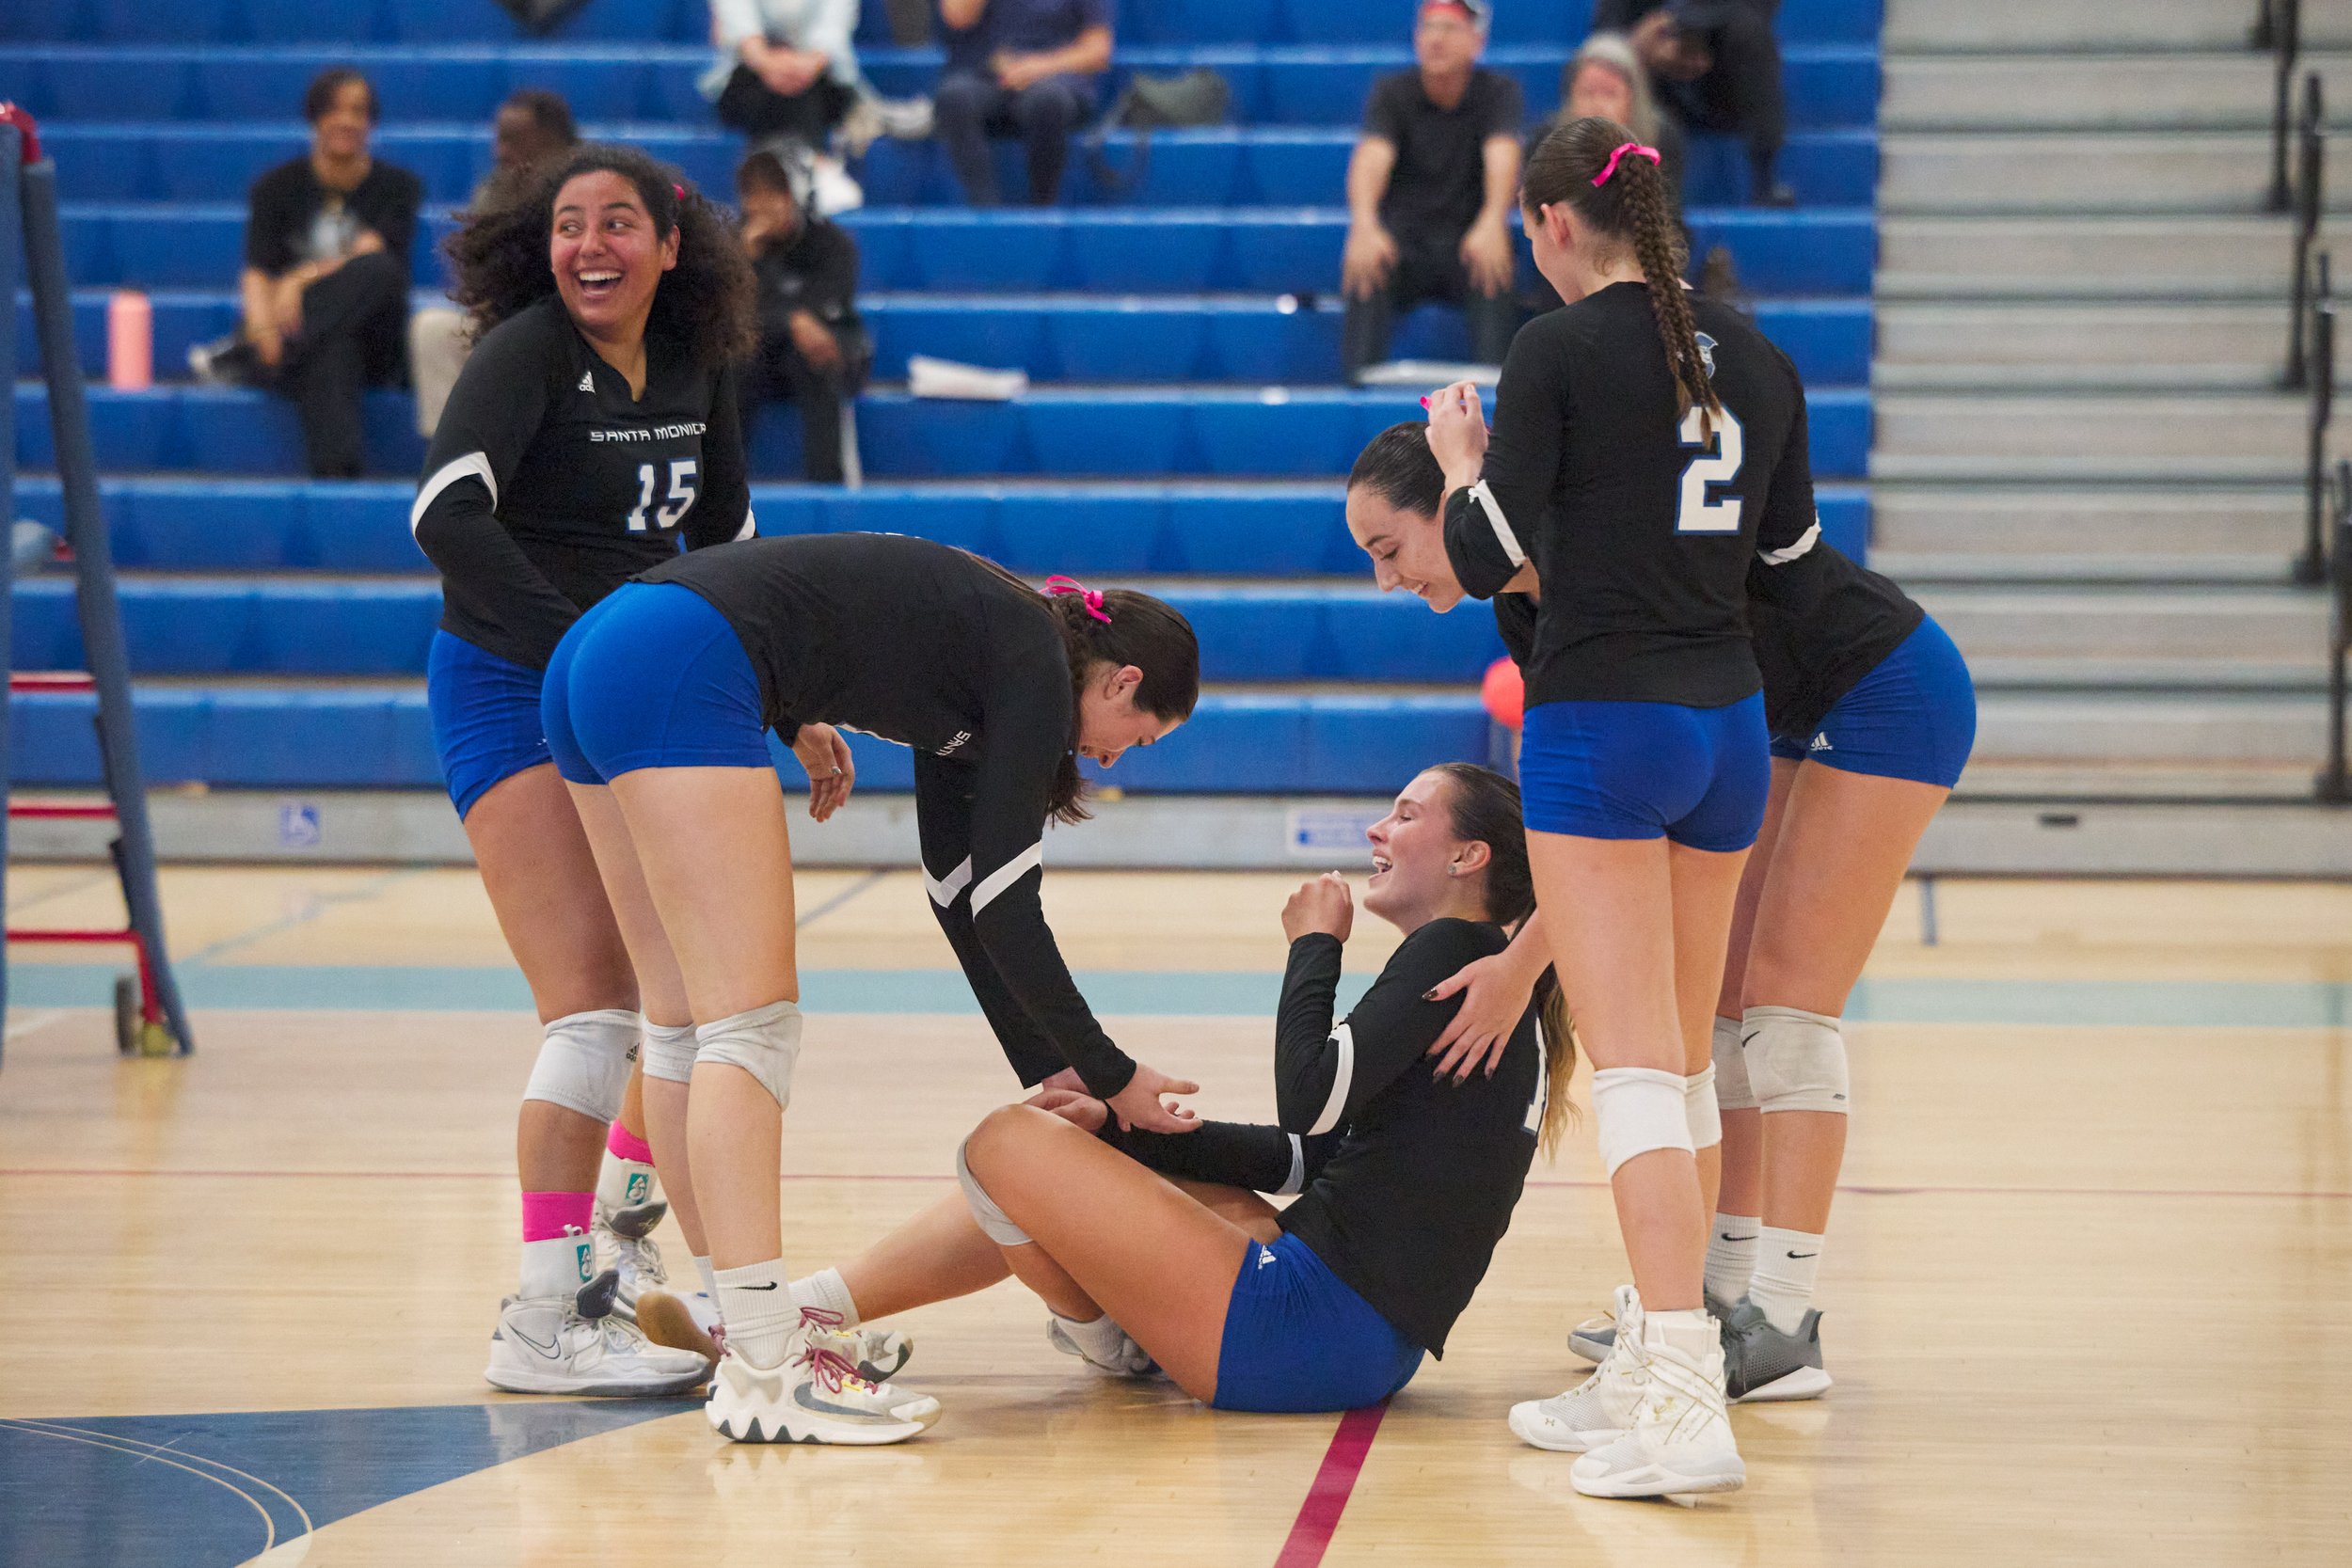  Santa Monica College Corsairs' Jaylynn Fierro, Maiella Riva, Natalie Fernandez (rear right), and Prior Borick (2) gather around and laugh with Mia Paulson (seated) after she got smacked in the face with the ball during the women's volleyball match a